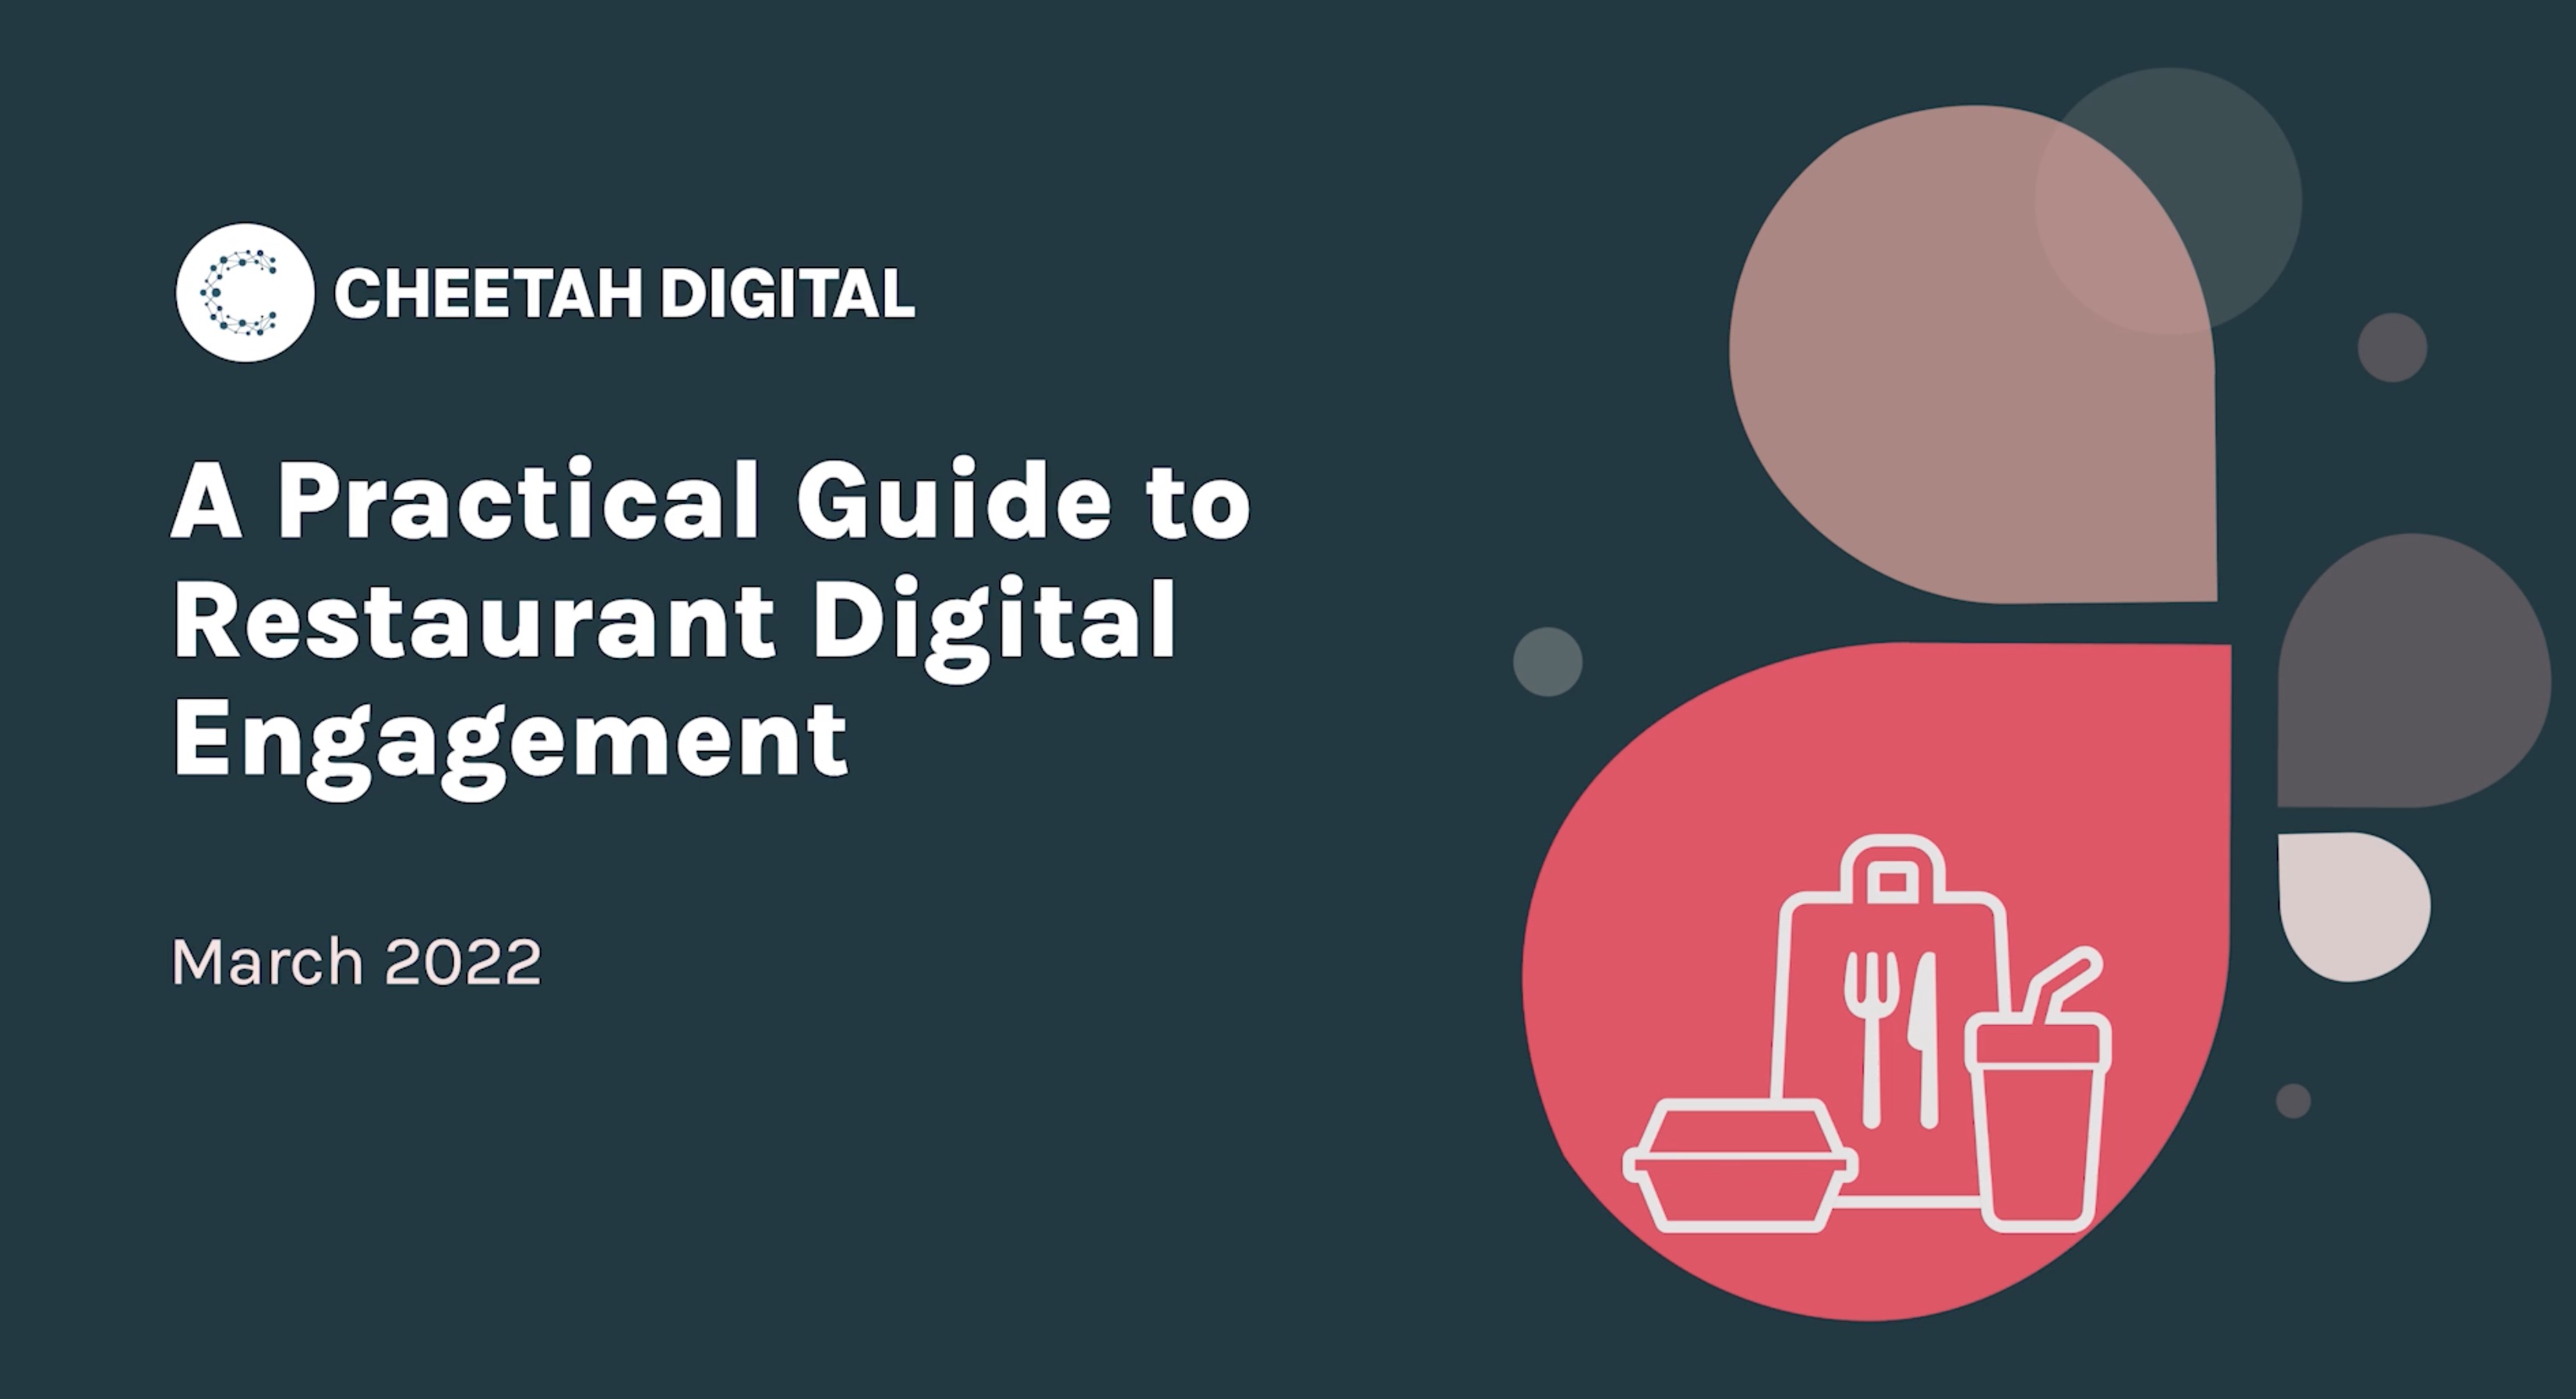 A Practical Guide to Restaurant Digital Engagement